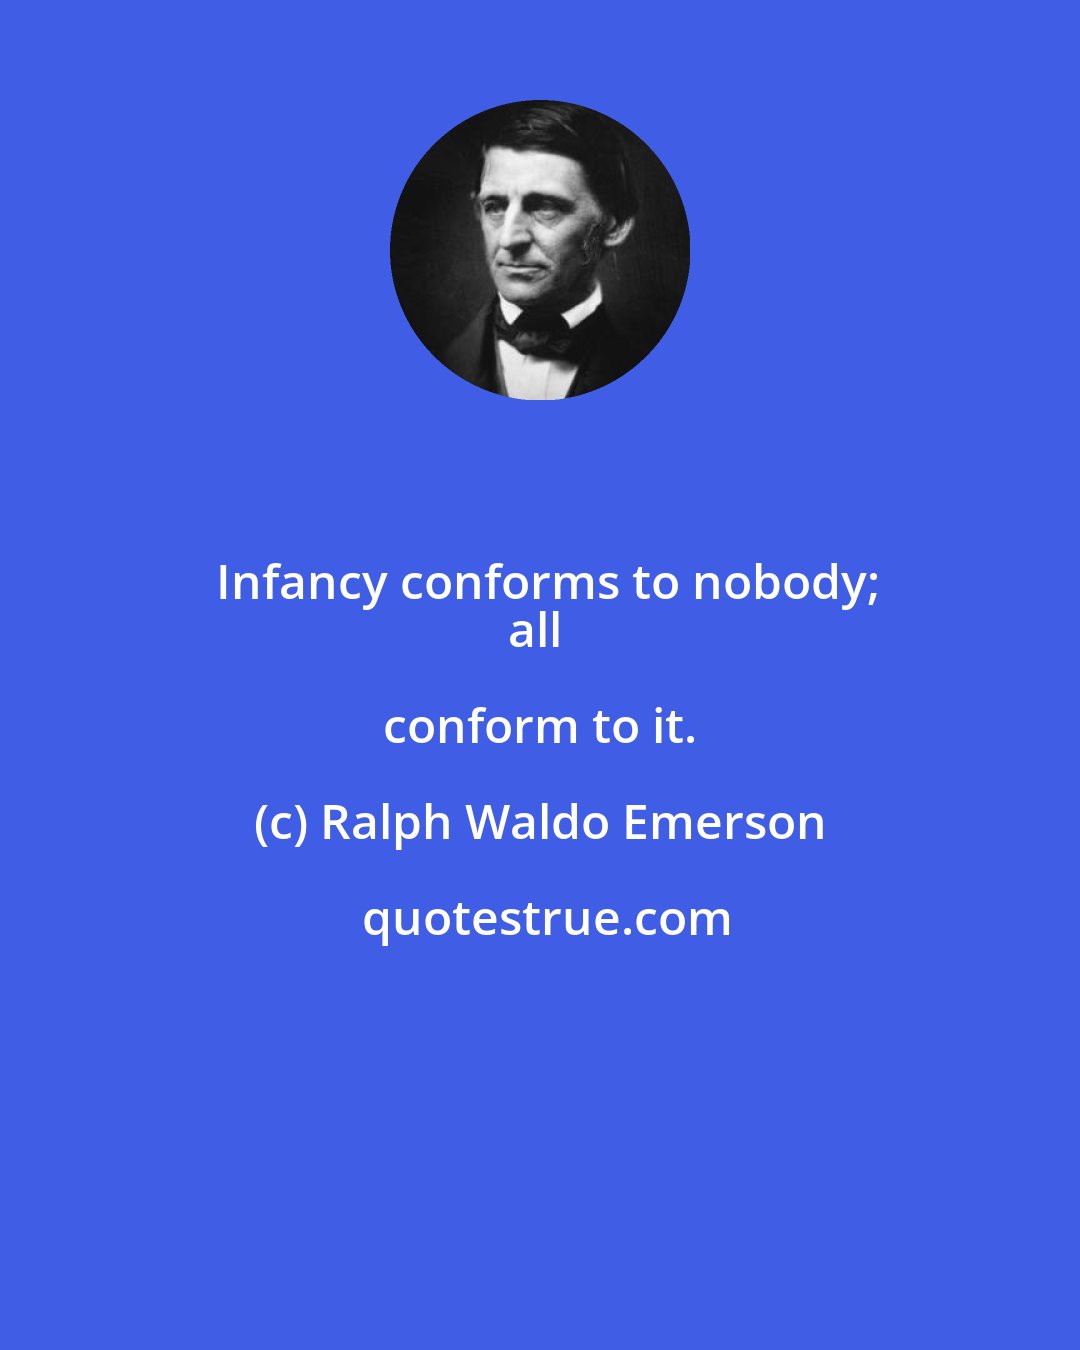 Ralph Waldo Emerson: Infancy conforms to nobody;
all conform to it.